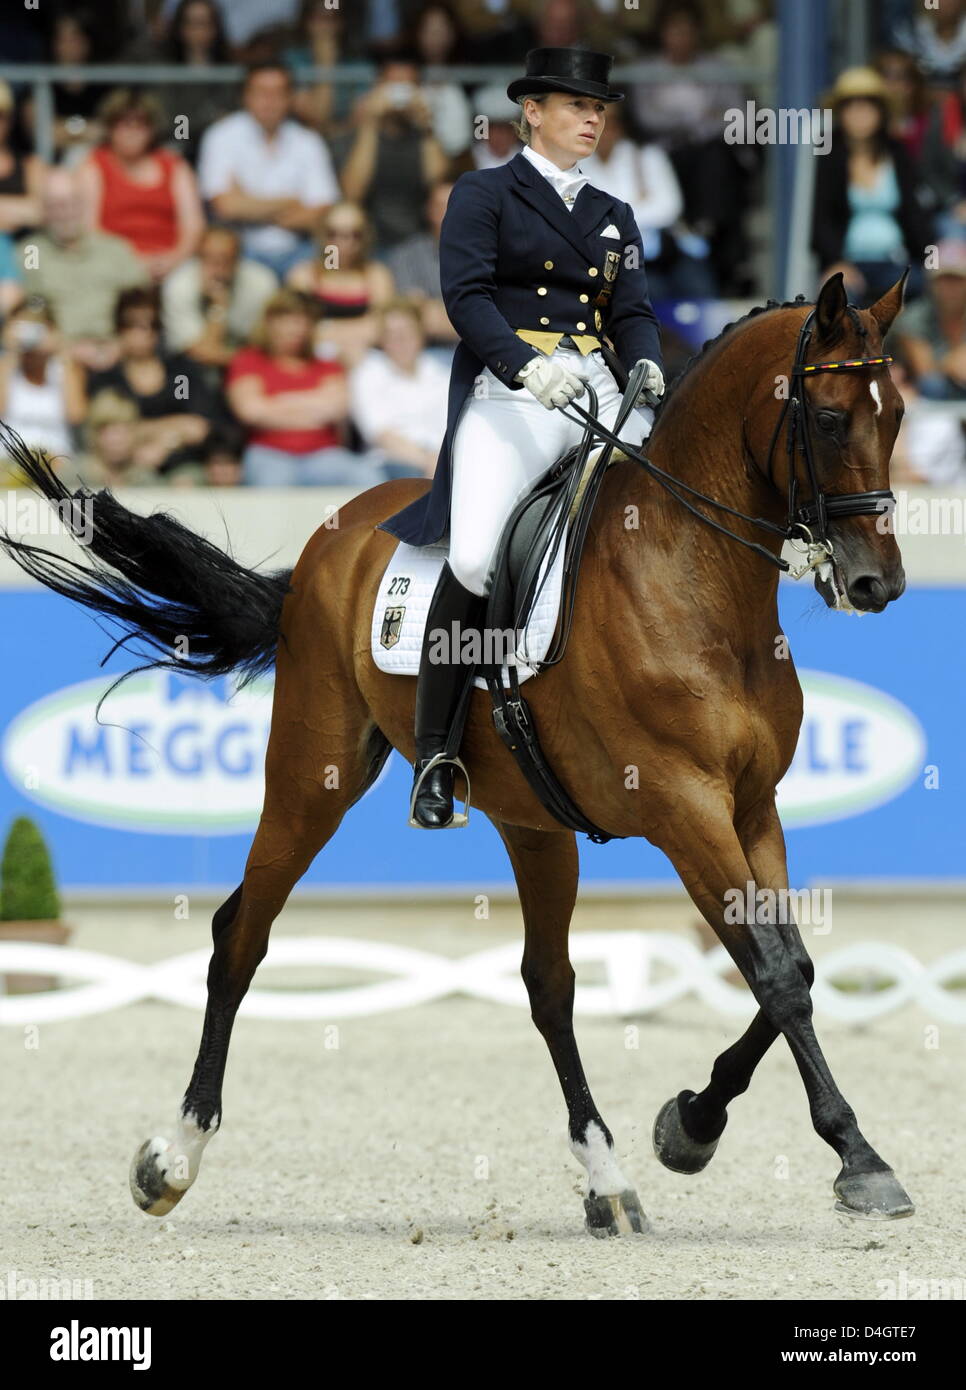 German Dressage Rider Isabell Werth On Satchmo Shown In Action During A Dressage Exercise At The Chio World Equestrian Festival In Aachen Germany 6 July 2008 Photo Jochen Luebke Stock Photo Alamy